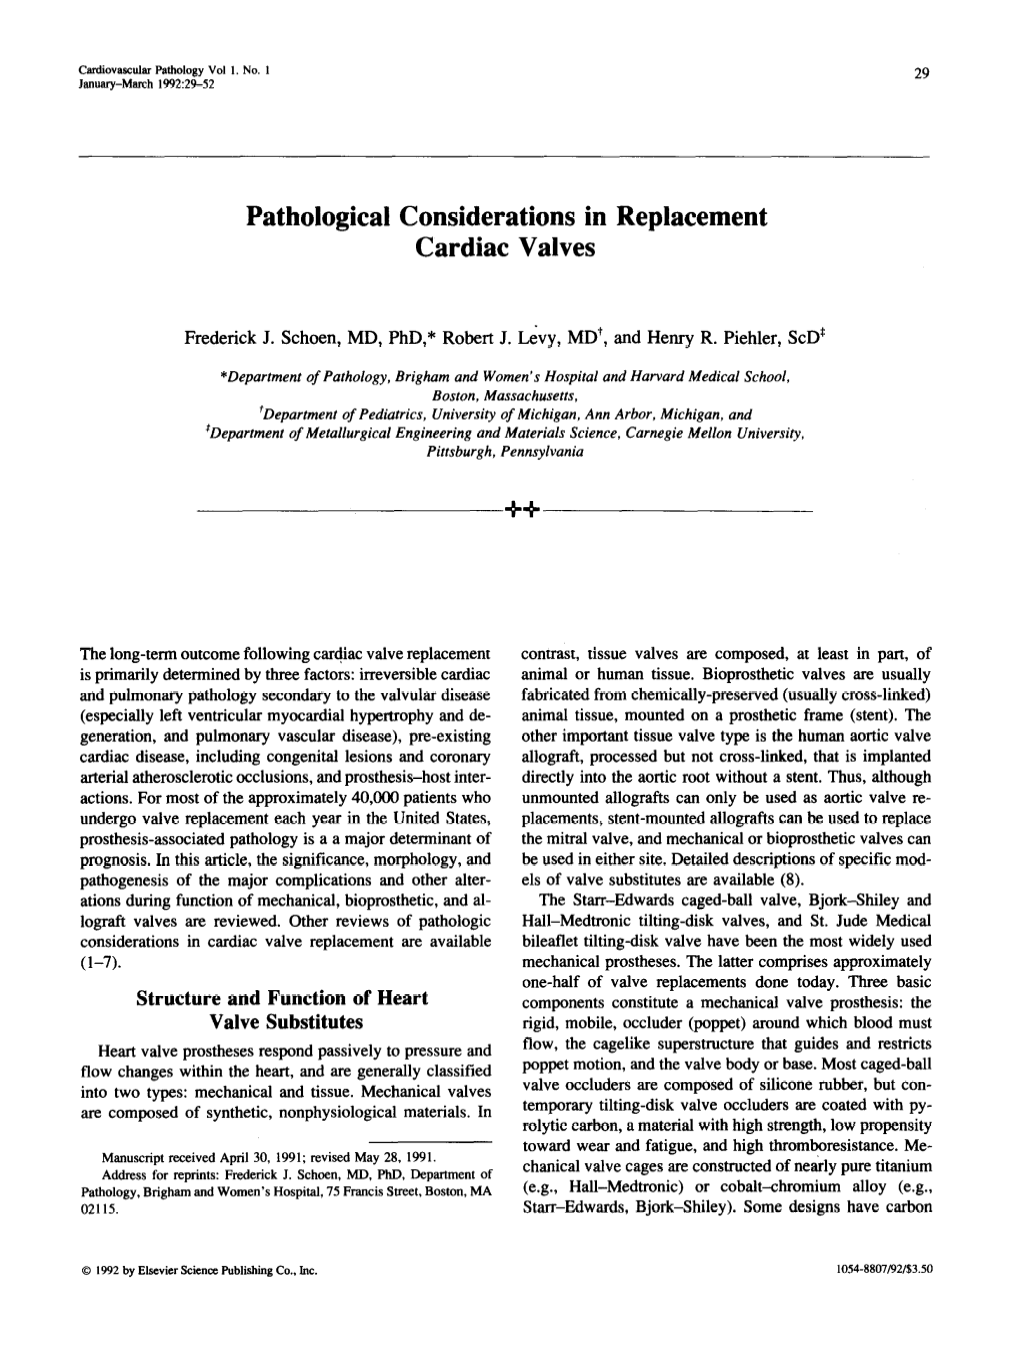 Pathological Considerations in Replacement Cardiac Valves